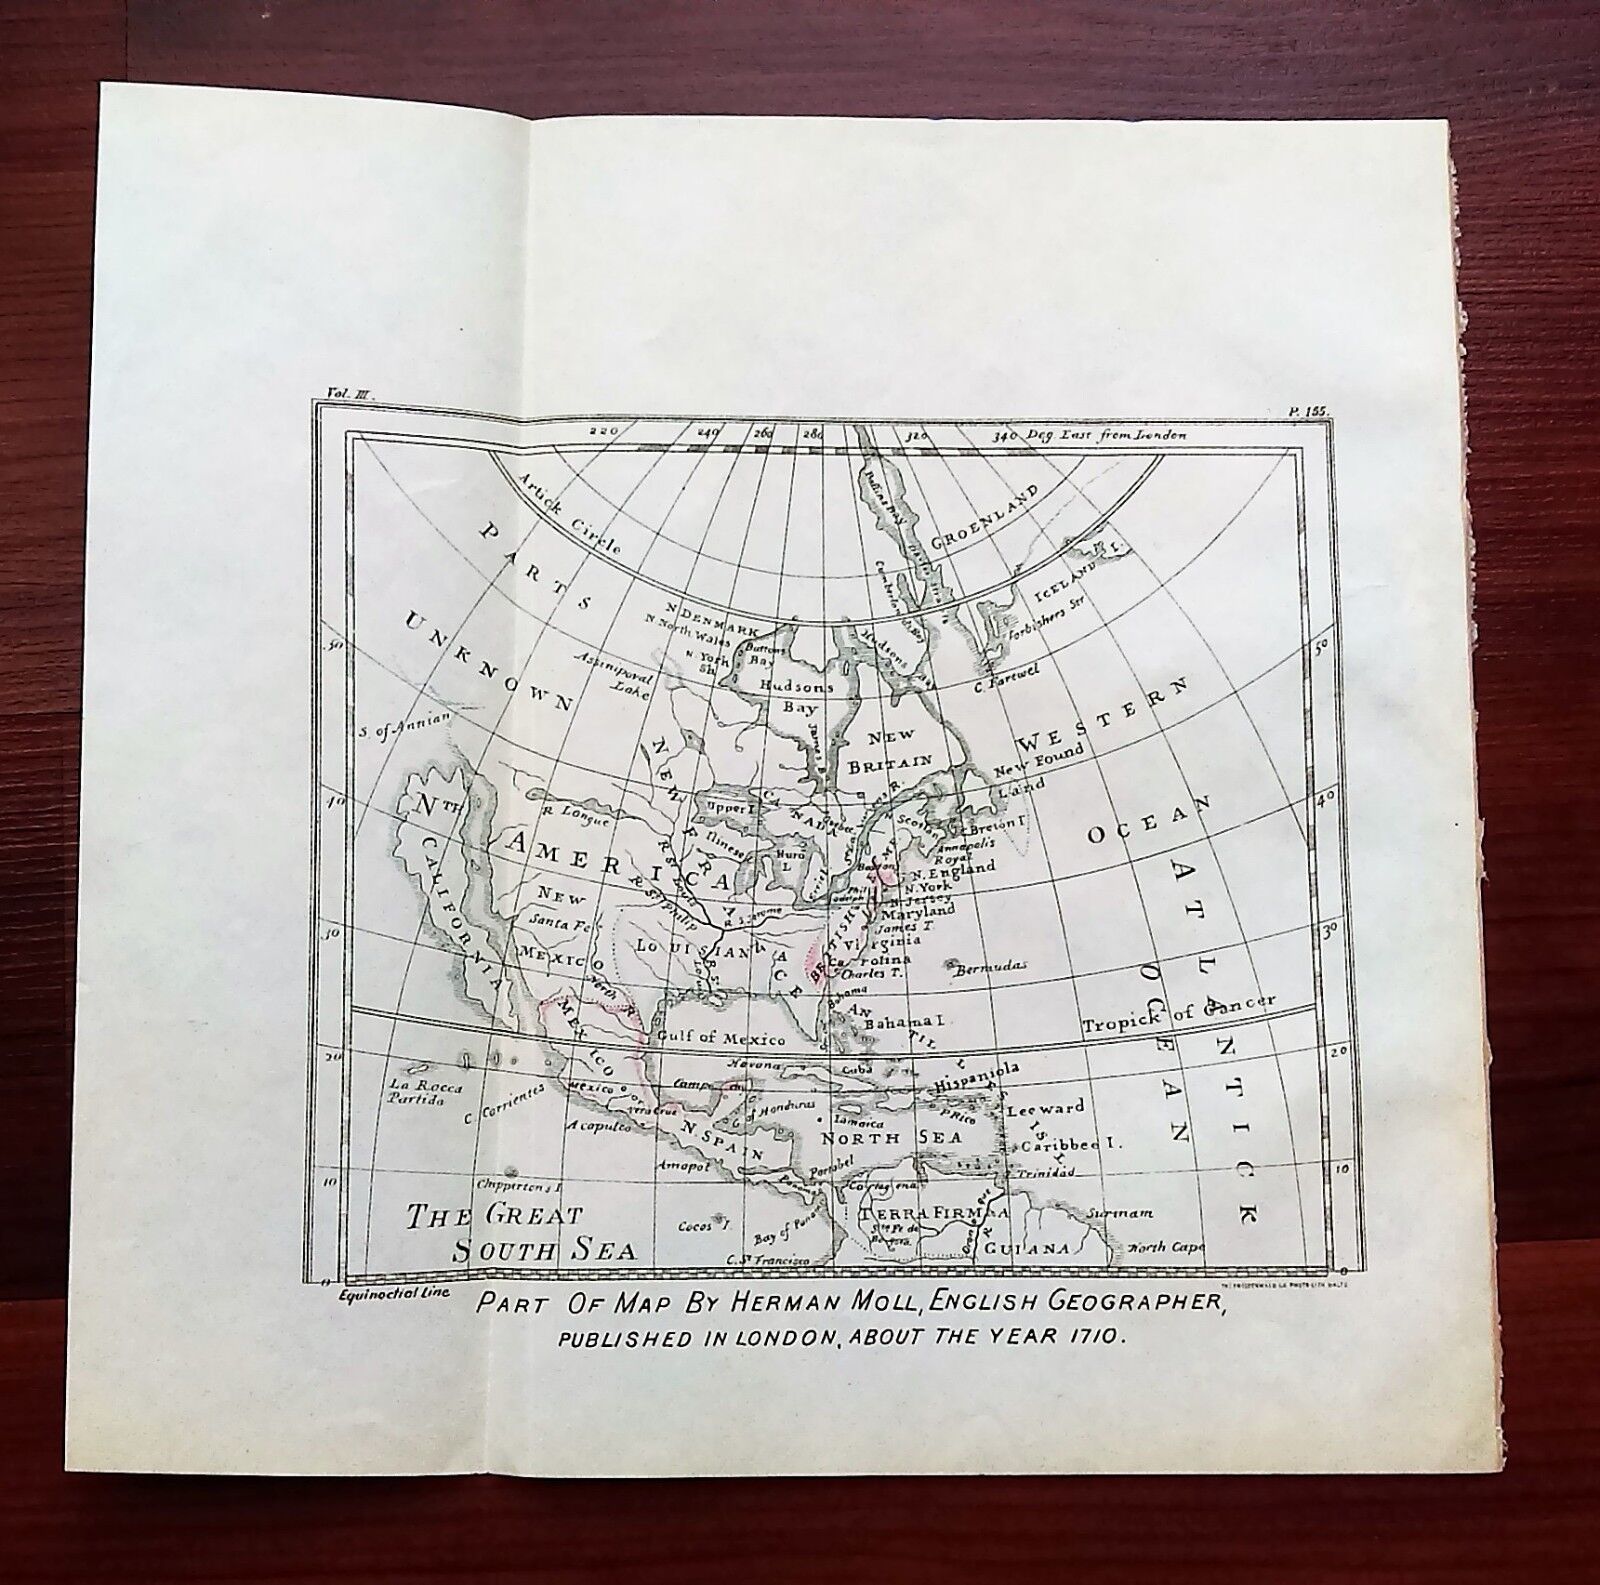 1900 Sketch Map of 1710 Partial World Map by Herman Moll English Geographer